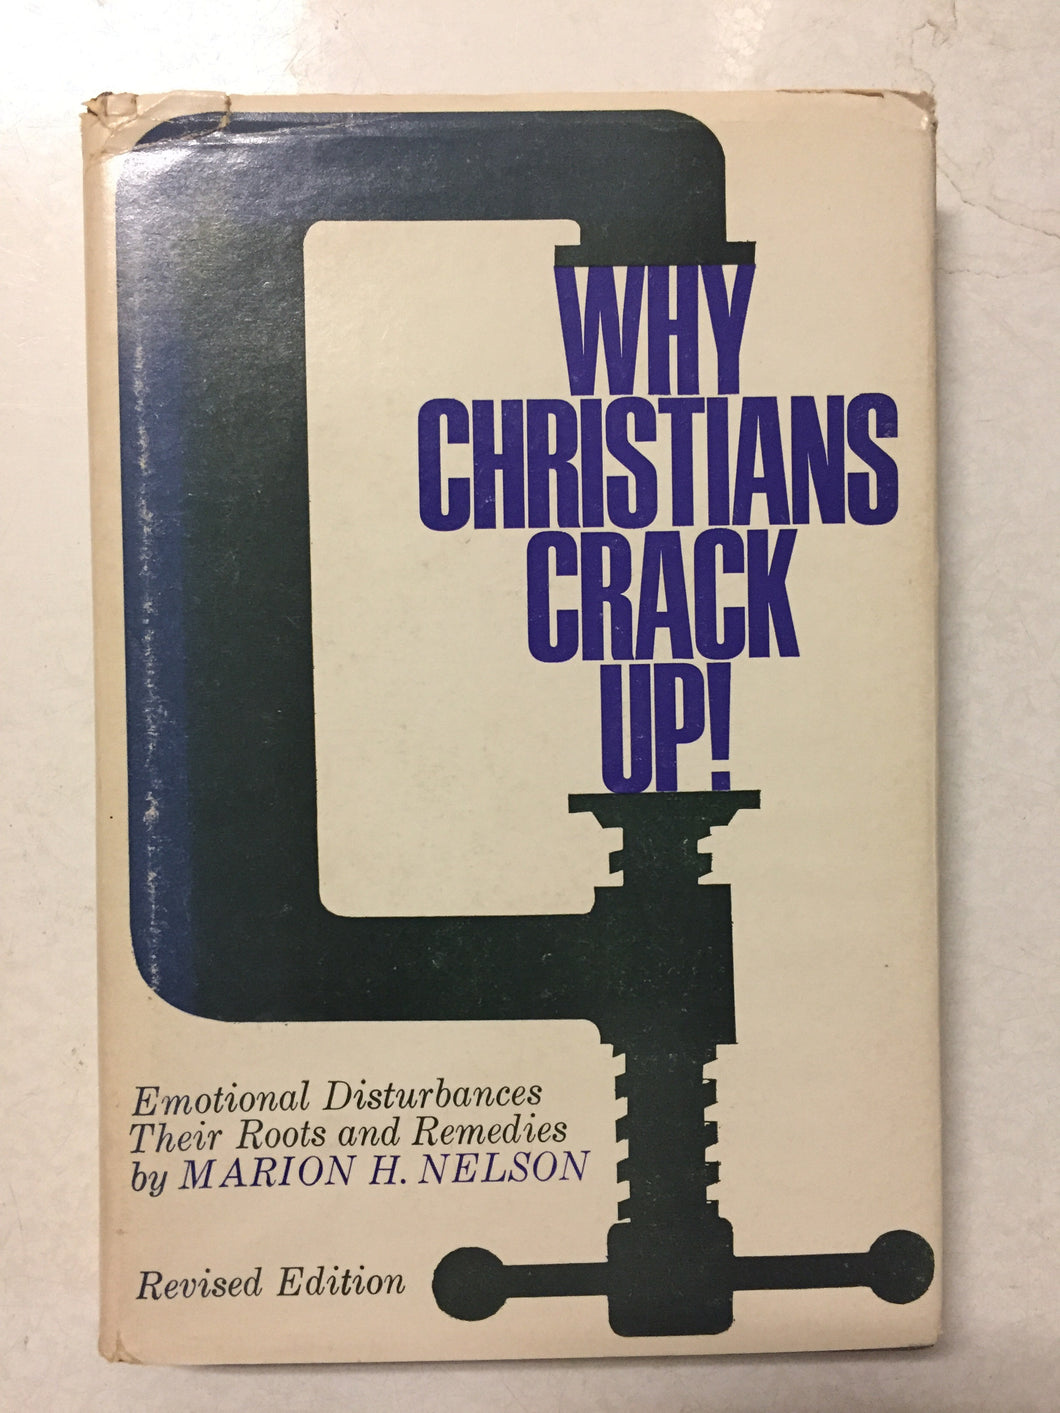 Why Christians Crack Up! Emotional Disturbances Their Roots and Remedies - Slickcatbooks